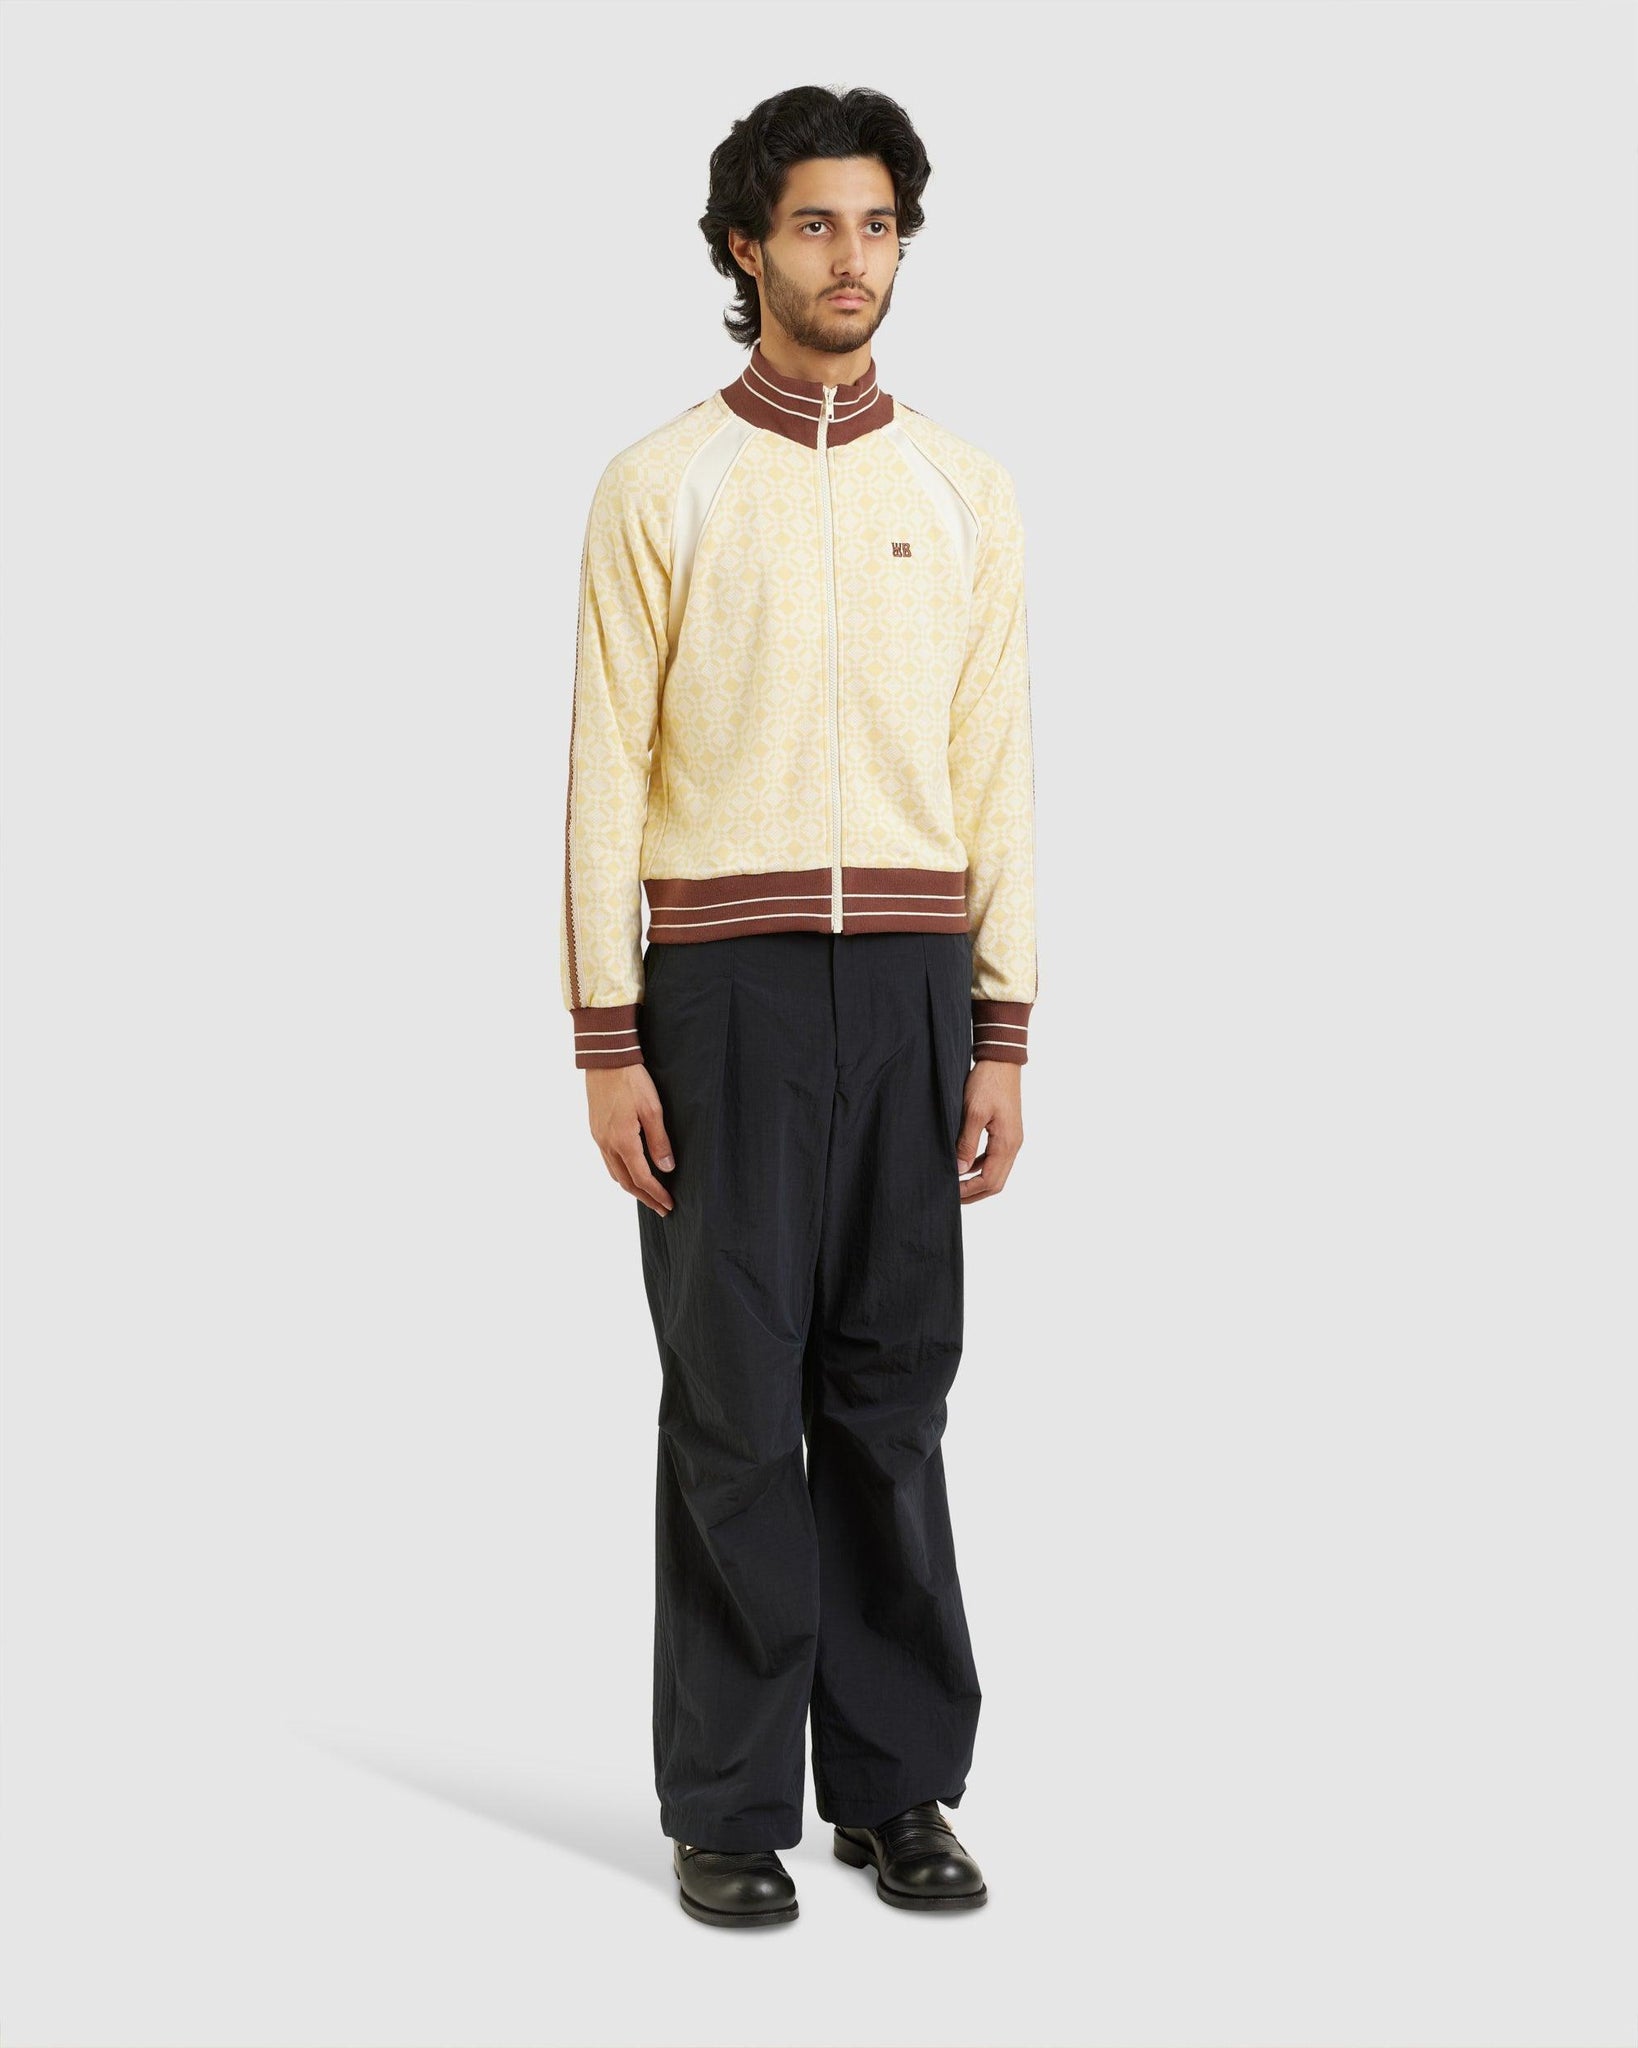 Shine Track Top Jacket - {{ collection.title }} - Chinatown Country Club 